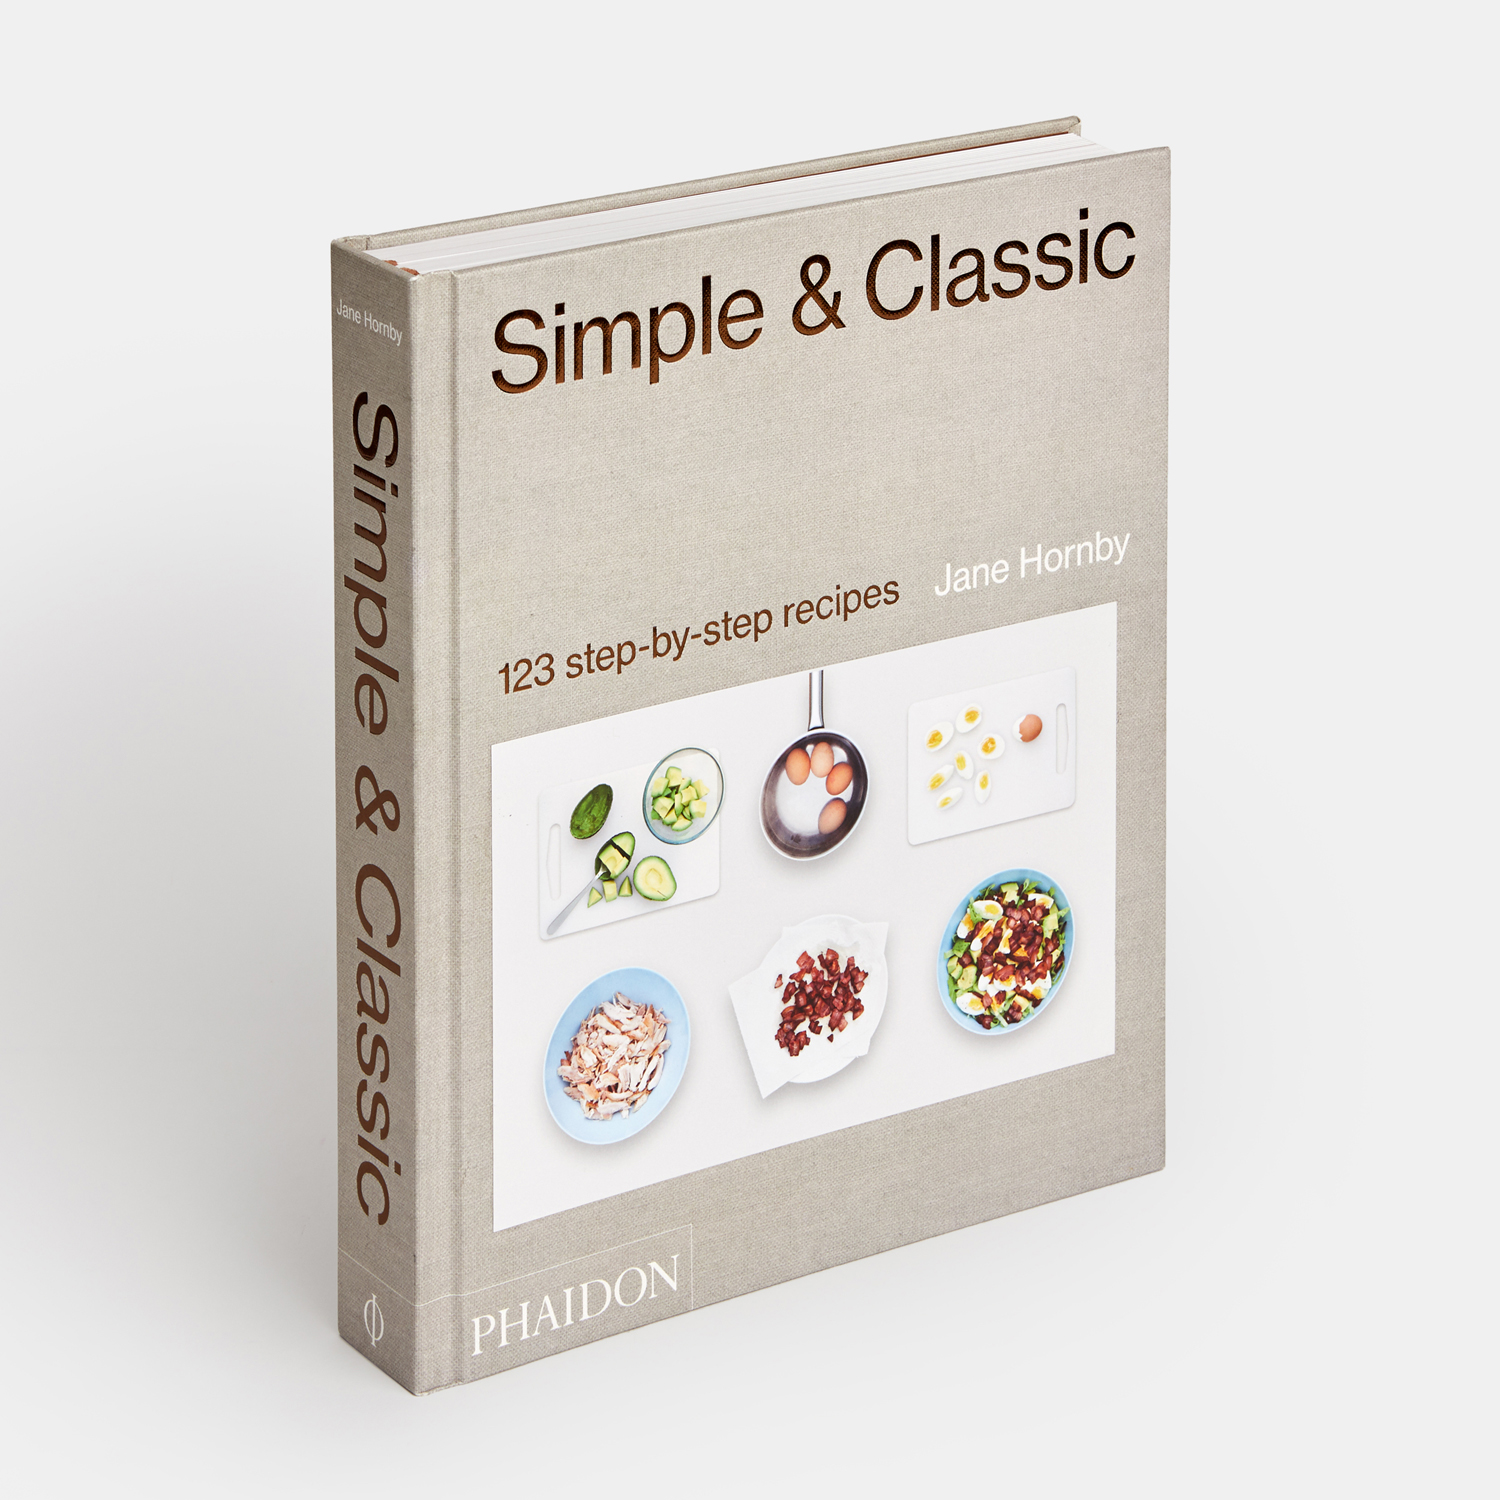 Simple & Classic by Jane Hornby